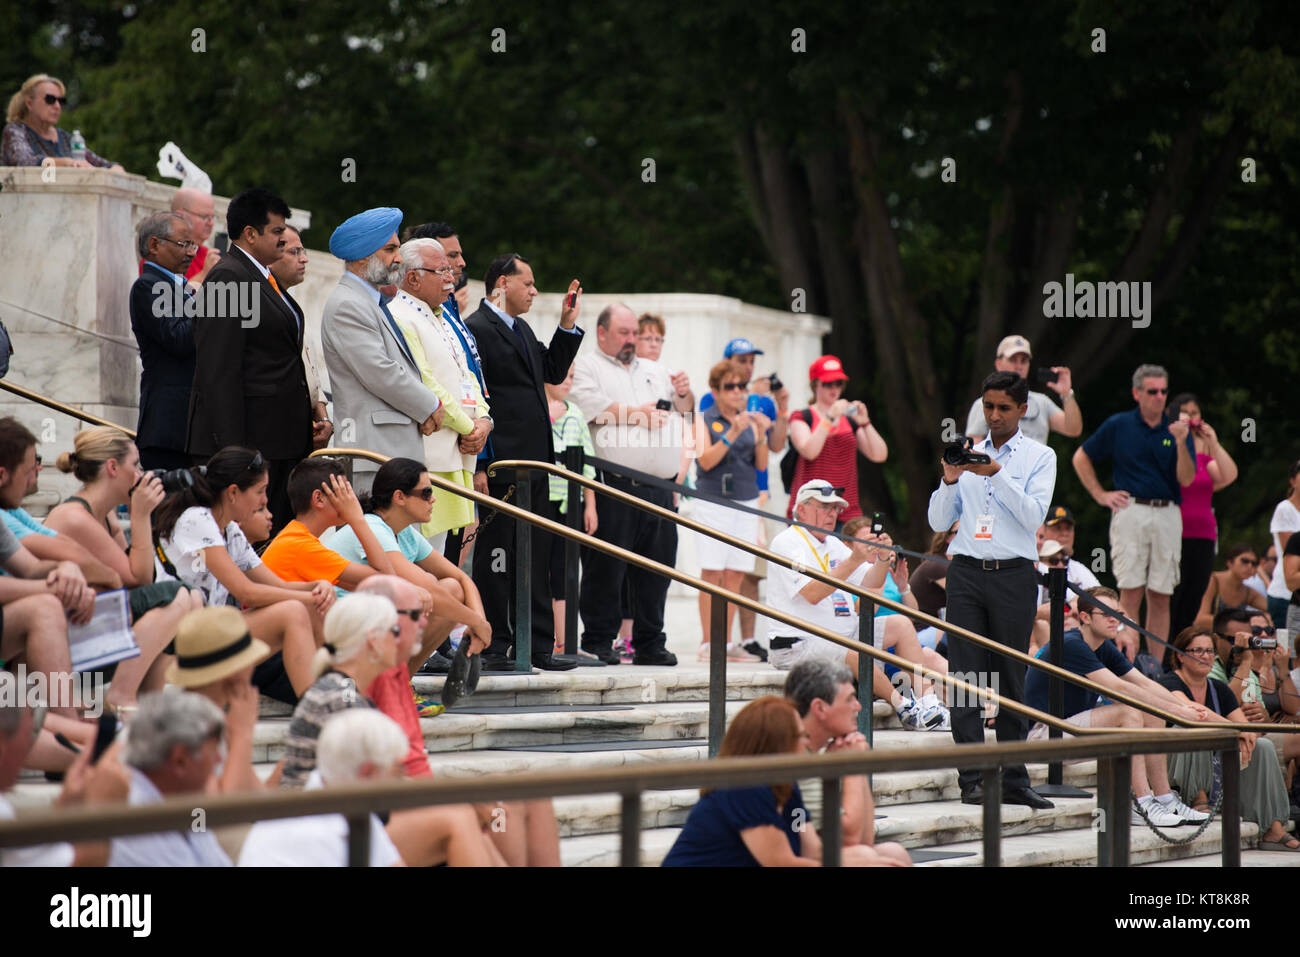 Chief Minister of Haryana, India Manohar Lal Khattar, along with others in the official party and other visitors, watch a Changing of the Guard ceremony at the Tomb of the Unknown Soldier in Arlington National Cemetery, Aug. 18, 2015, in Arlington, Va., immediately following a wreath-laying at the Space Shuttle Columbia Memorial. Kalpana Chawla, one of seven crew members killed during the Columbia disaster. She was born in Karnal, India, and was posthumously awarded the Congressional Space Medal of Honor, the NASA Space Flight Medal, and the NASA Distinguished Service Medal. (U.S. Army photo b Stock Photo